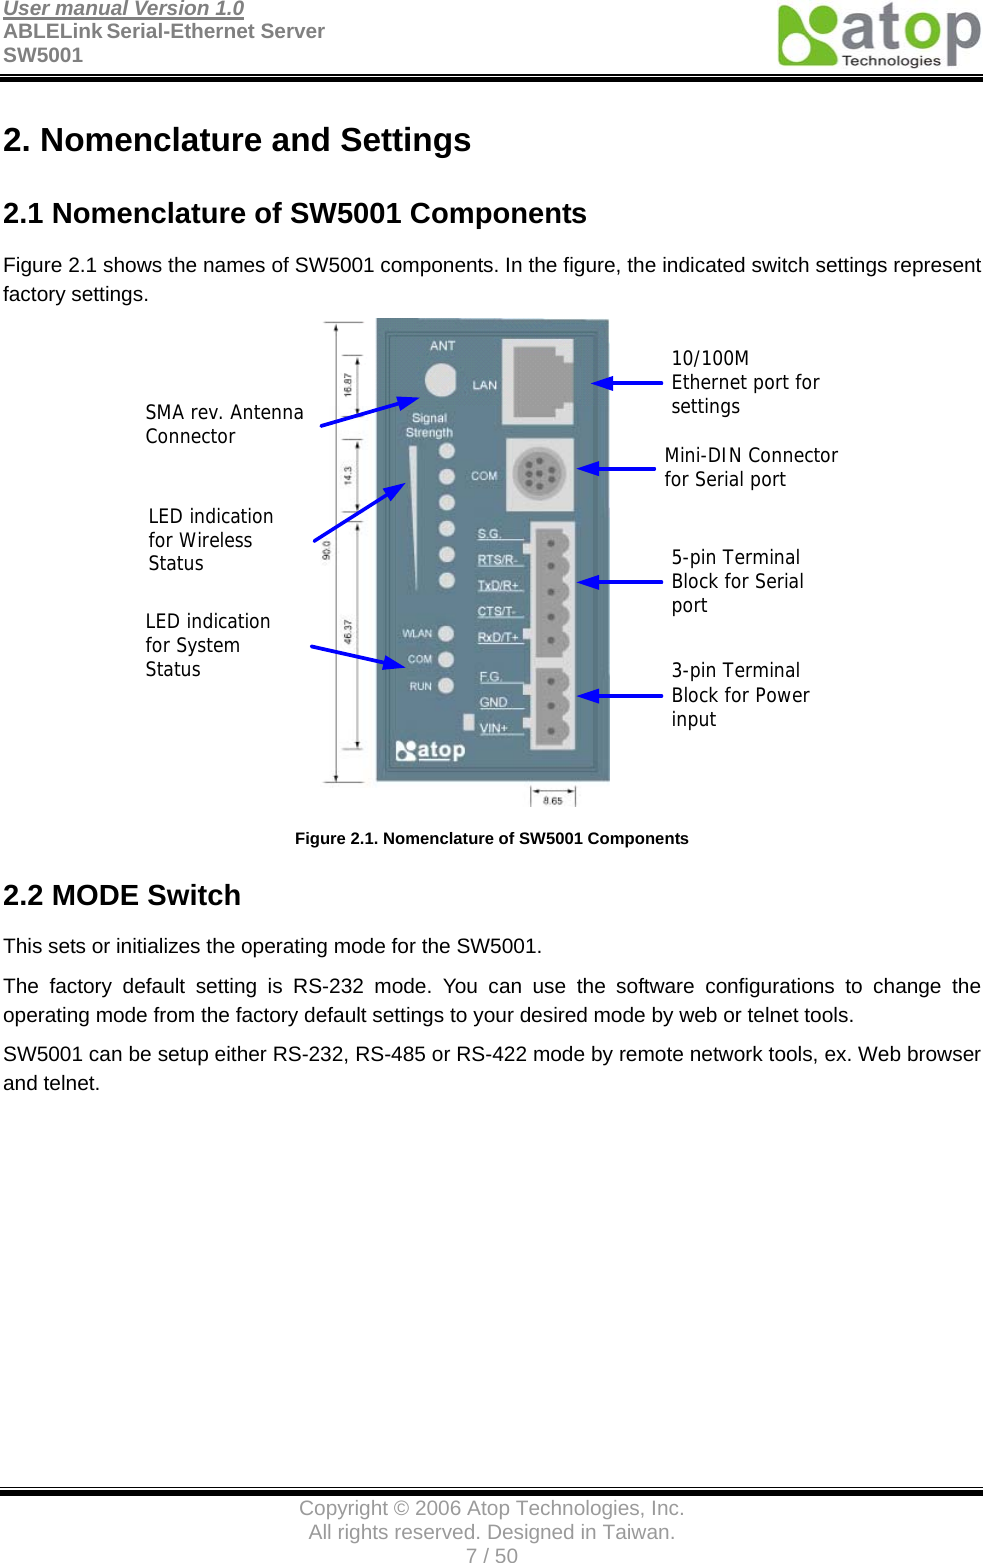 User manual Version 1.0 ABLELink Serial-Ethernet Server   SW5001                                        Copyright © 2006 Atop Technologies, Inc. All rights reserved. Designed in Taiwan. 7 / 50   2. Nomenclature and Settings 2.1 Nomenclature of SW5001 Components Figure 2.1 shows the names of SW5001 components. In the figure, the indicated switch settings represent factory settings. 10/100MEthernet port forsettingsMini-DIN Connectorfor Serial port5-pin TerminalBlock for Serialport3-pin TerminalBlock for PowerinputSMA rev. AntennaConnectorLED indicationfor WirelessStatusLED indicationfor SystemStatus Figure 2.1. Nomenclature of SW5001 Components 2.2 MODE Switch This sets or initializes the operating mode for the SW5001. The factory default setting is RS-232 mode. You can use the software configurations to change the operating mode from the factory default settings to your desired mode by web or telnet tools. SW5001 can be setup either RS-232, RS-485 or RS-422 mode by remote network tools, ex. Web browser and telnet. 